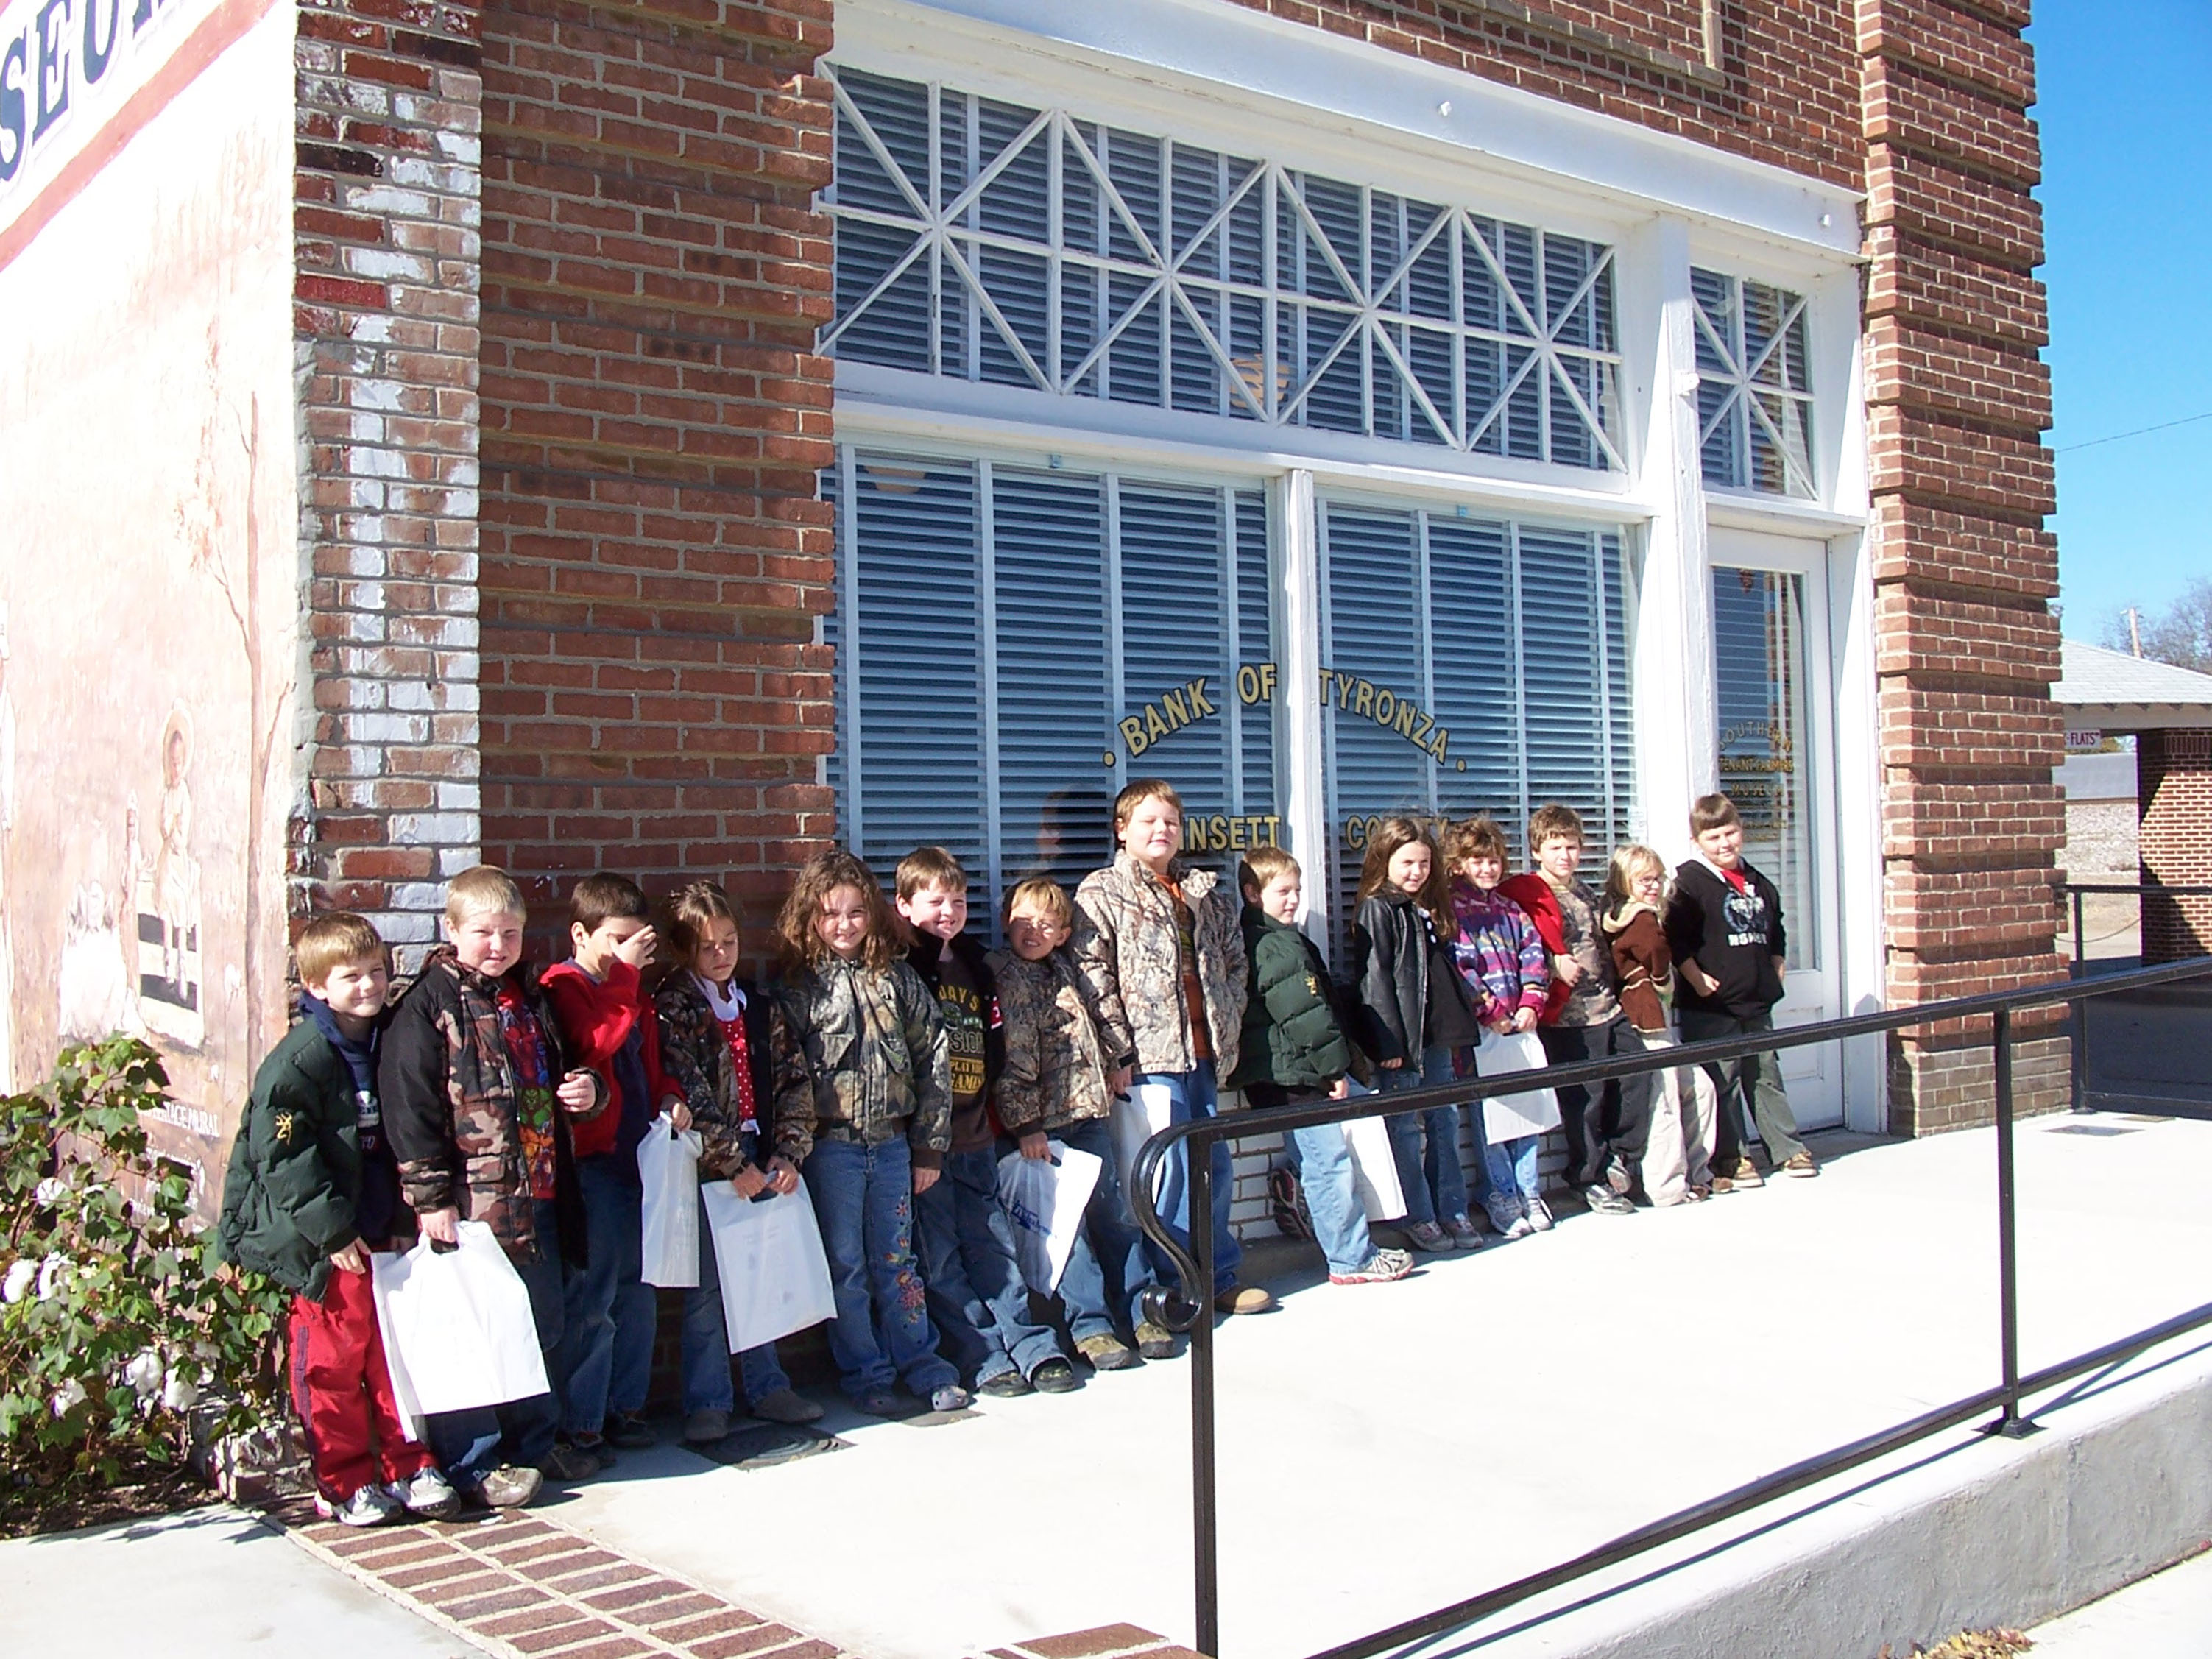 Schoolchildren visit the restored Old Bank of Tyronza building, now part of the Southern Tenant Farmers Museum. The Museum offers activities for seniors and youth, as well as an oral history room.